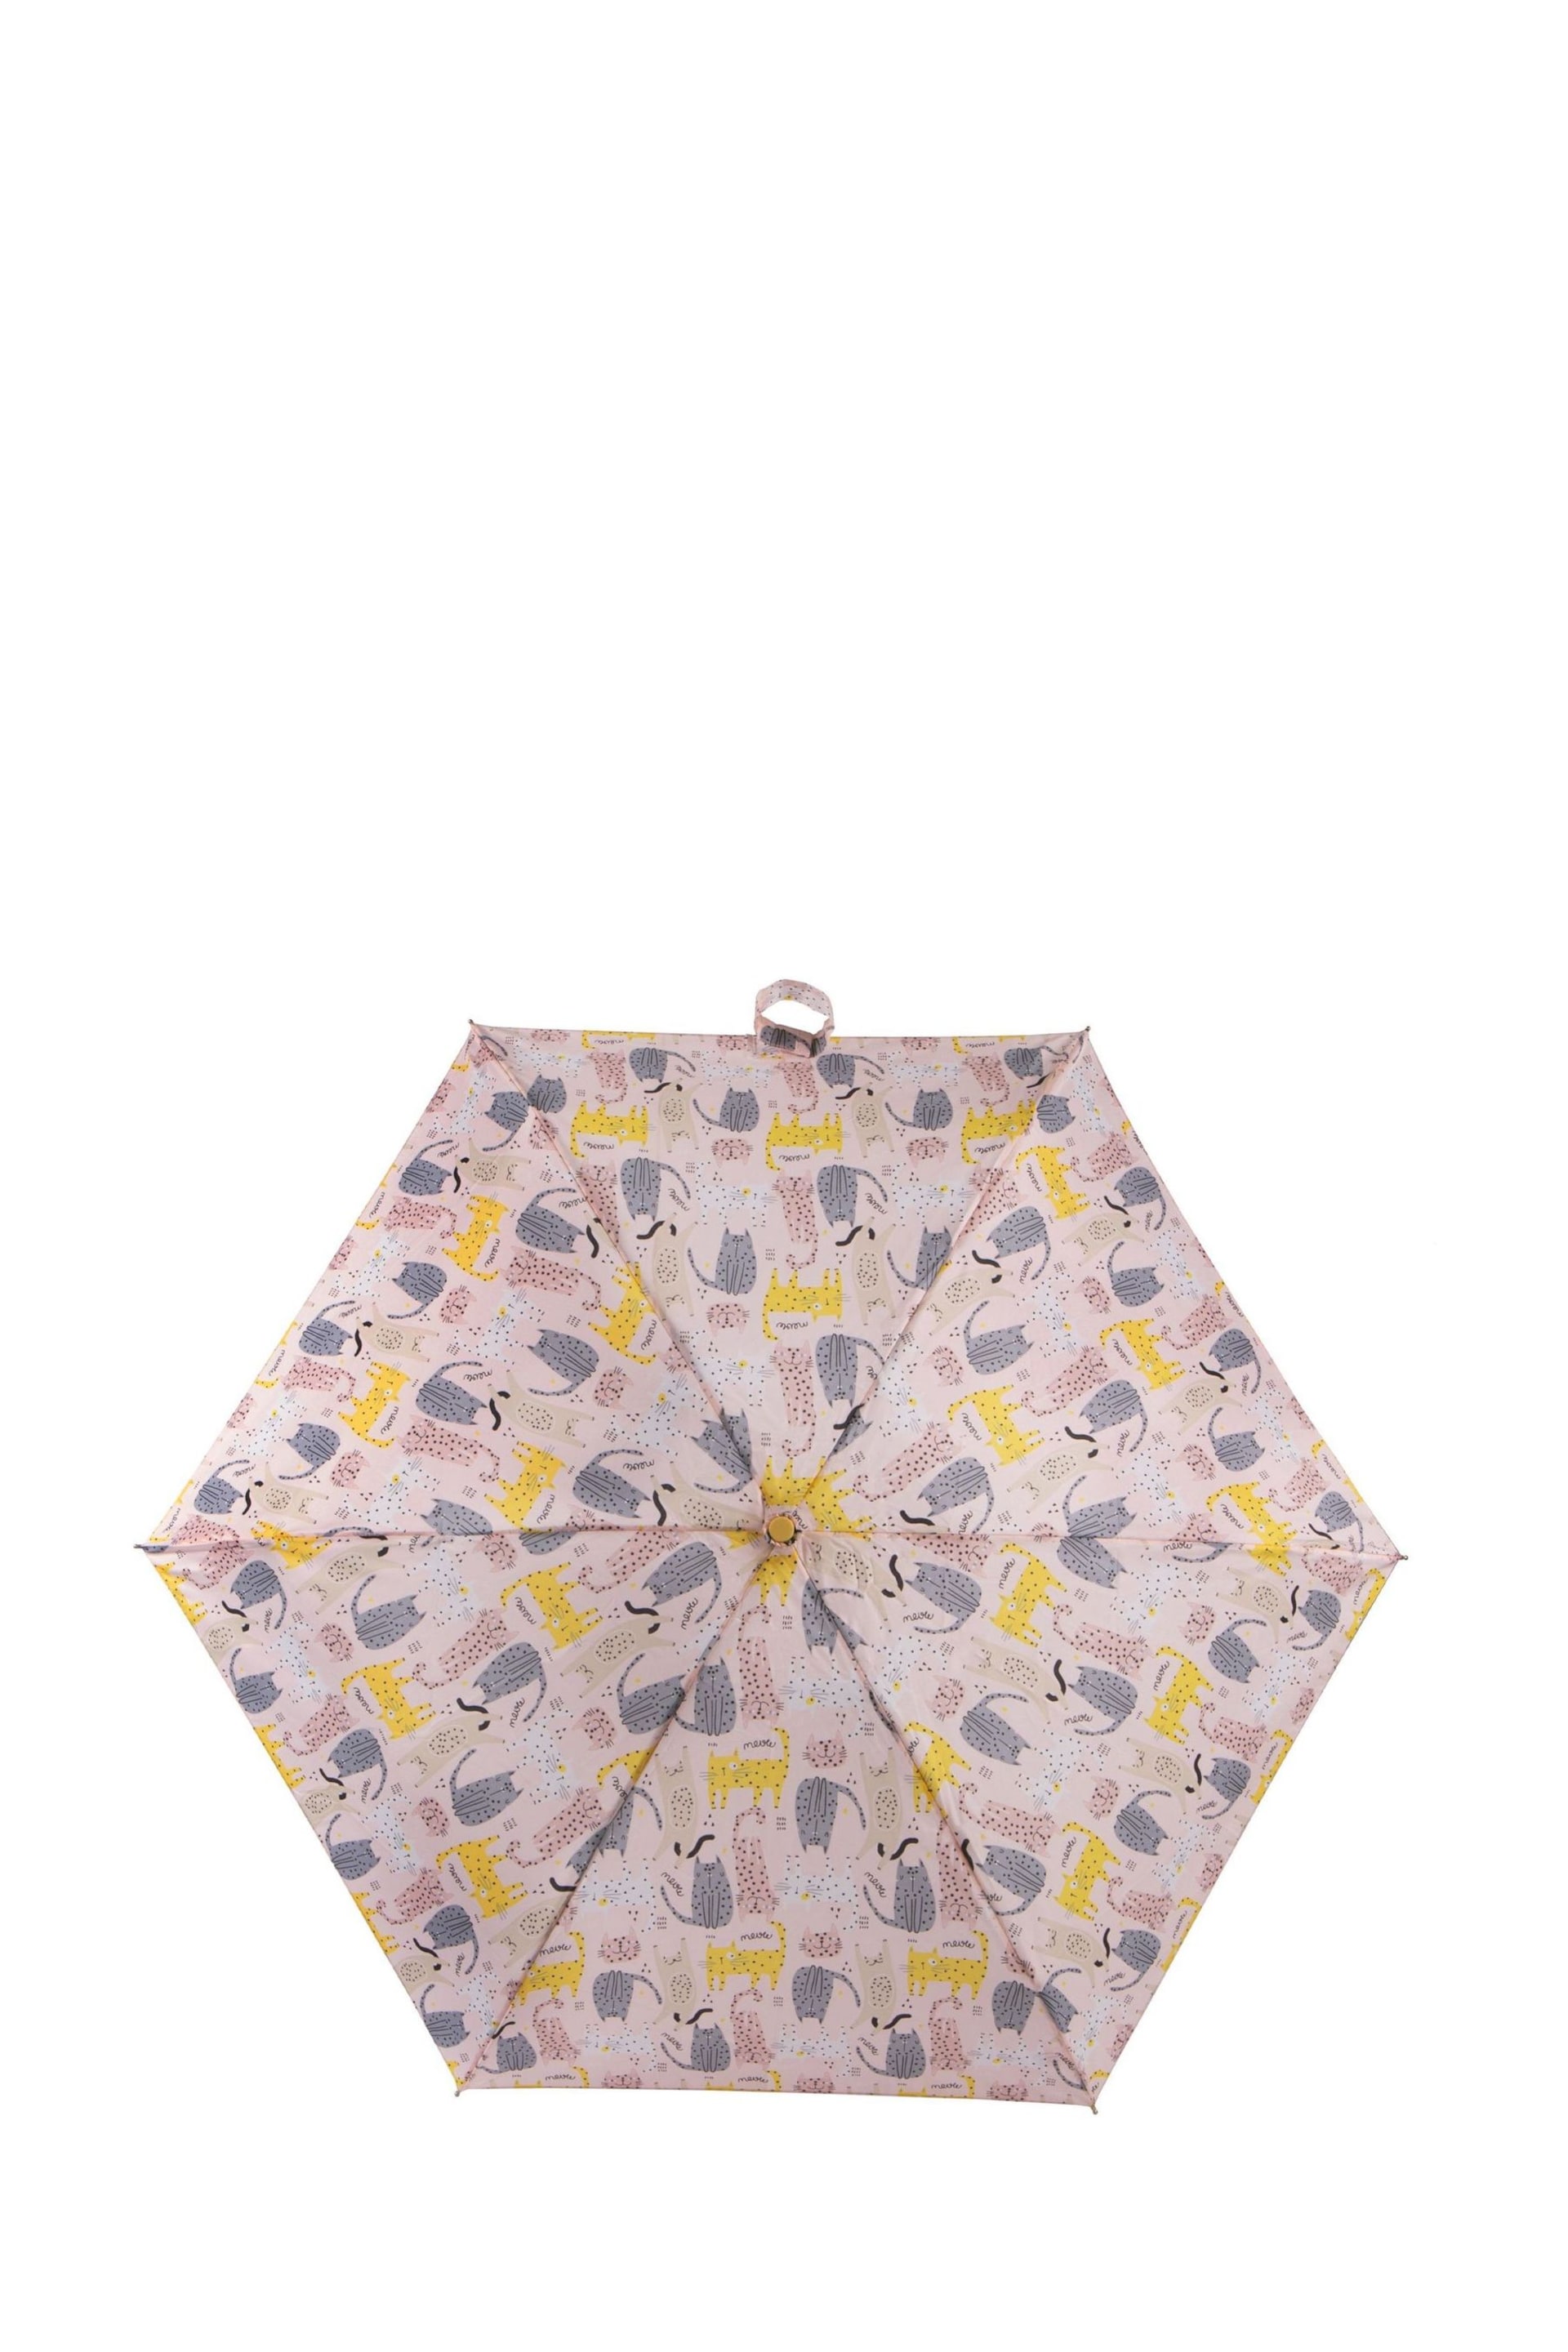 Totes Pink Eco Compact Round Dotty Cats Umbrella - Image 3 of 4